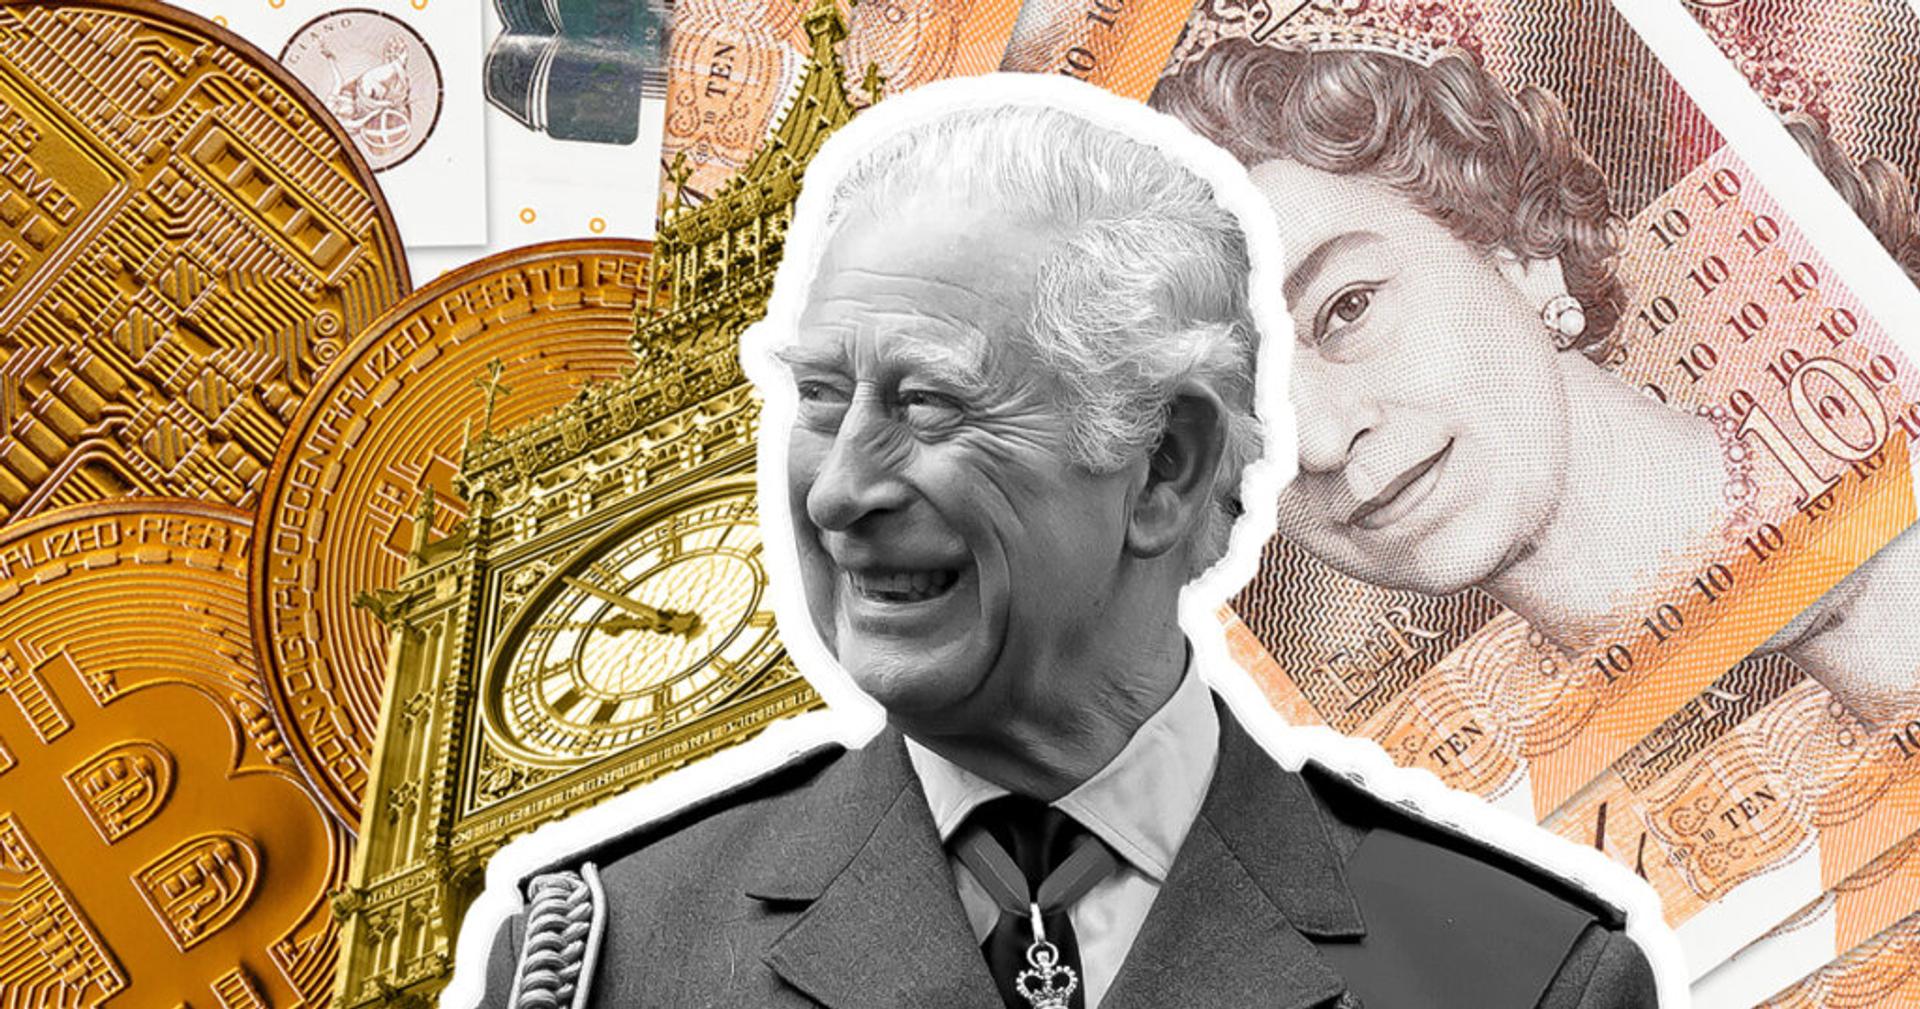 King Charles in the foreground on a collage background with images of Bitcoin, £10 notes and Big Ben